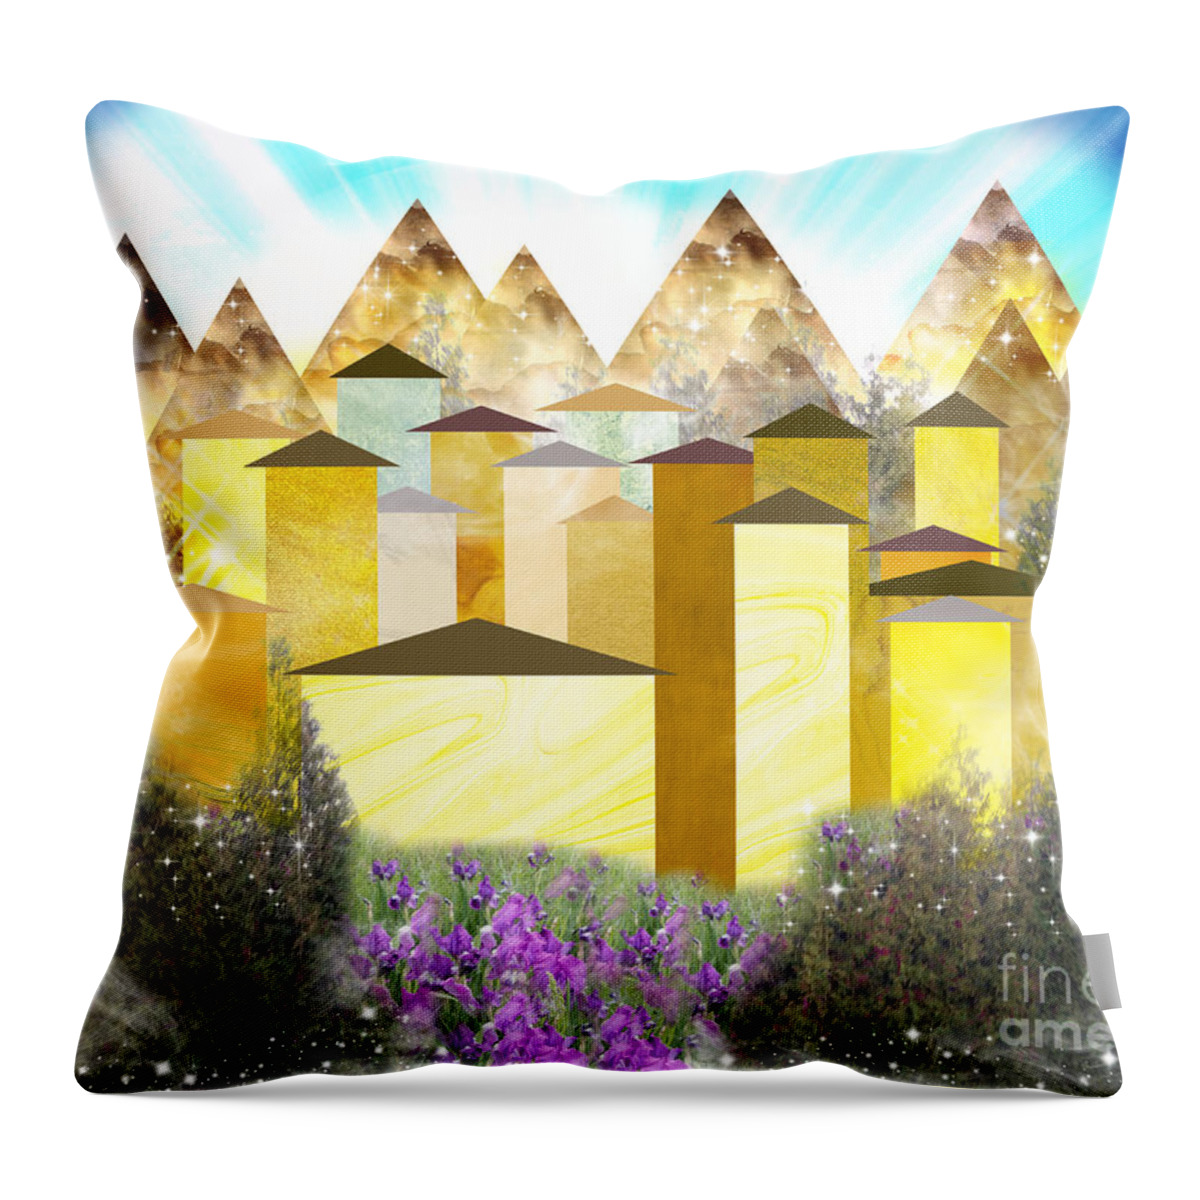 Inspirational Art Throw Pillow featuring the mixed media The City On A Hill by Diamante Lavendar